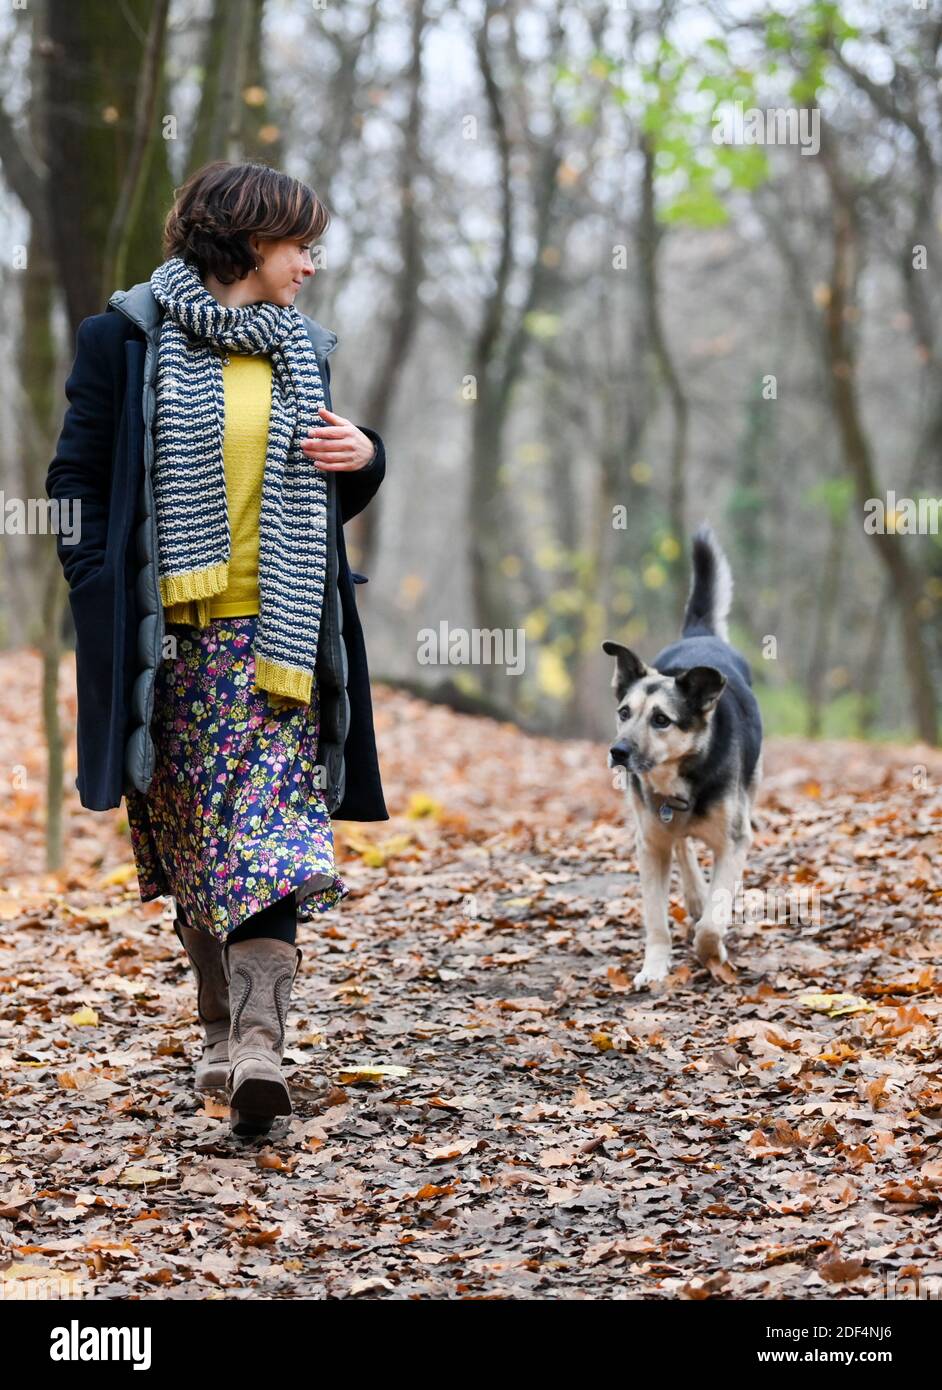 Berlin, Germany. 30th Nov, 2020. The actress Julia Brendler during a walk with her dog Istak in the park Schönholzer Heide in Niederschönhausen She plays the leading role in the film of the ZDF series 'Katie Fforde: Emmas Geheimnis', which will be broadcast on 06.12.2020 at 20.15. She is also known from the ZDF crime series 'Nord Nord Mord'. Istak is 11 years old and an animal protection dog from Moscow's streets. Credit: Jens Kalaene/dpa-Zentralbild/ZB/dpa/Alamy Live News Stock Photo